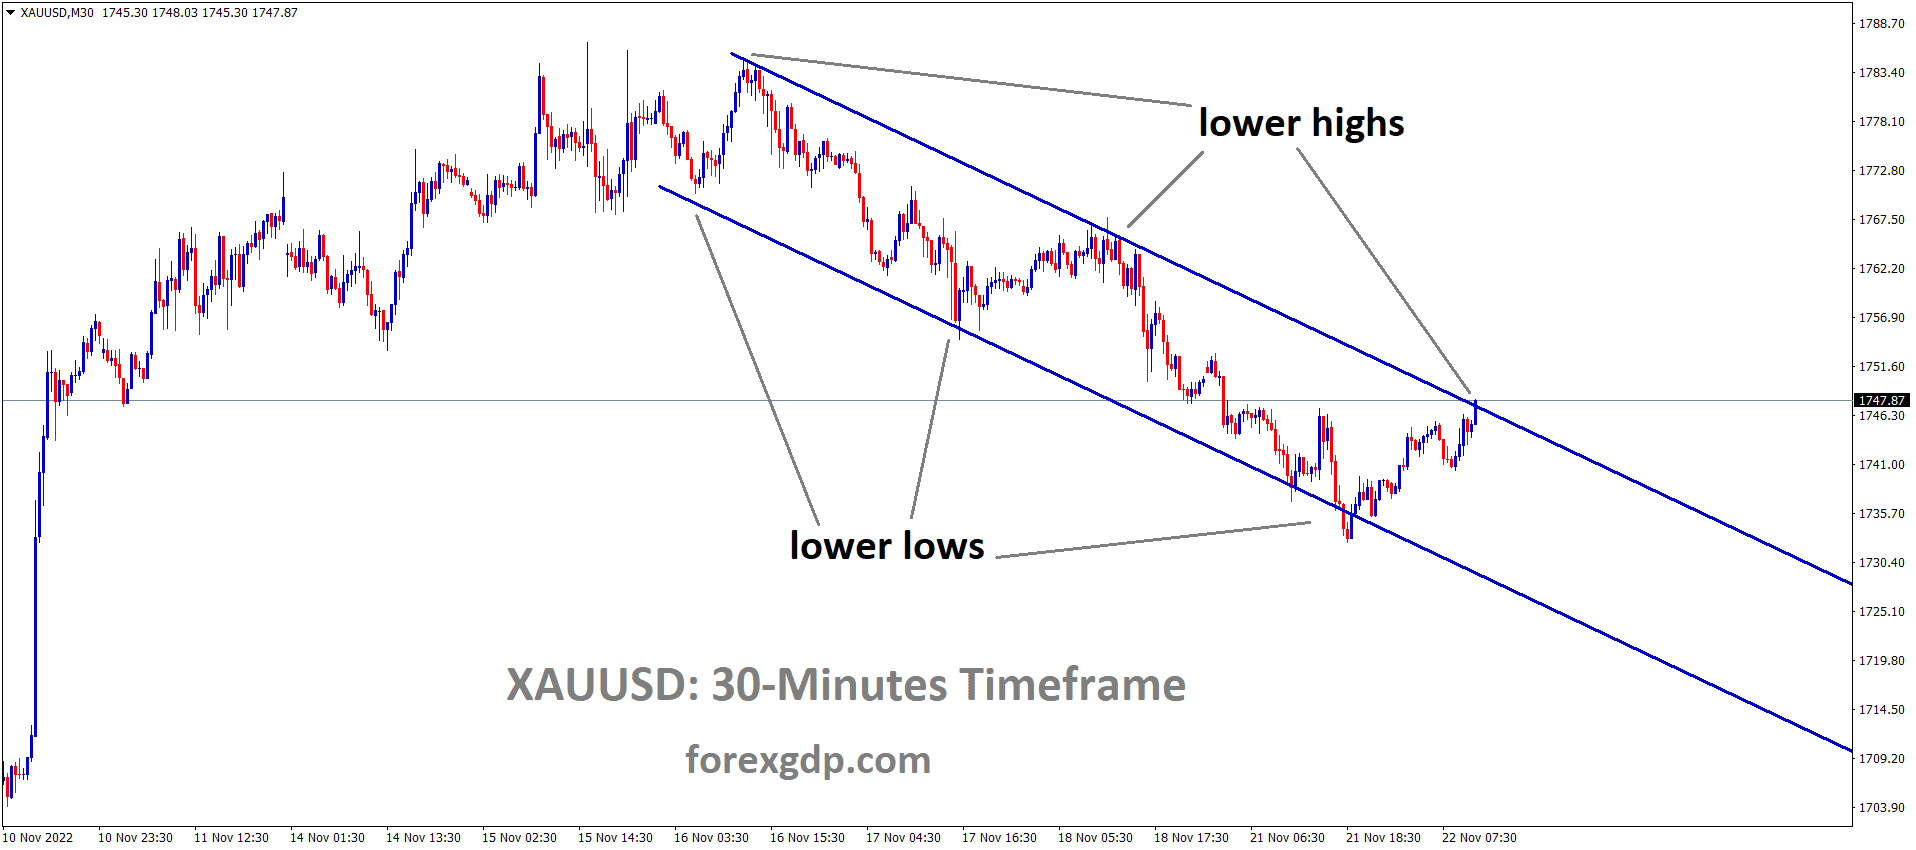 XAUUSD Gold price is moving in the Descending channel and the market has reached the lower high area of the channel.